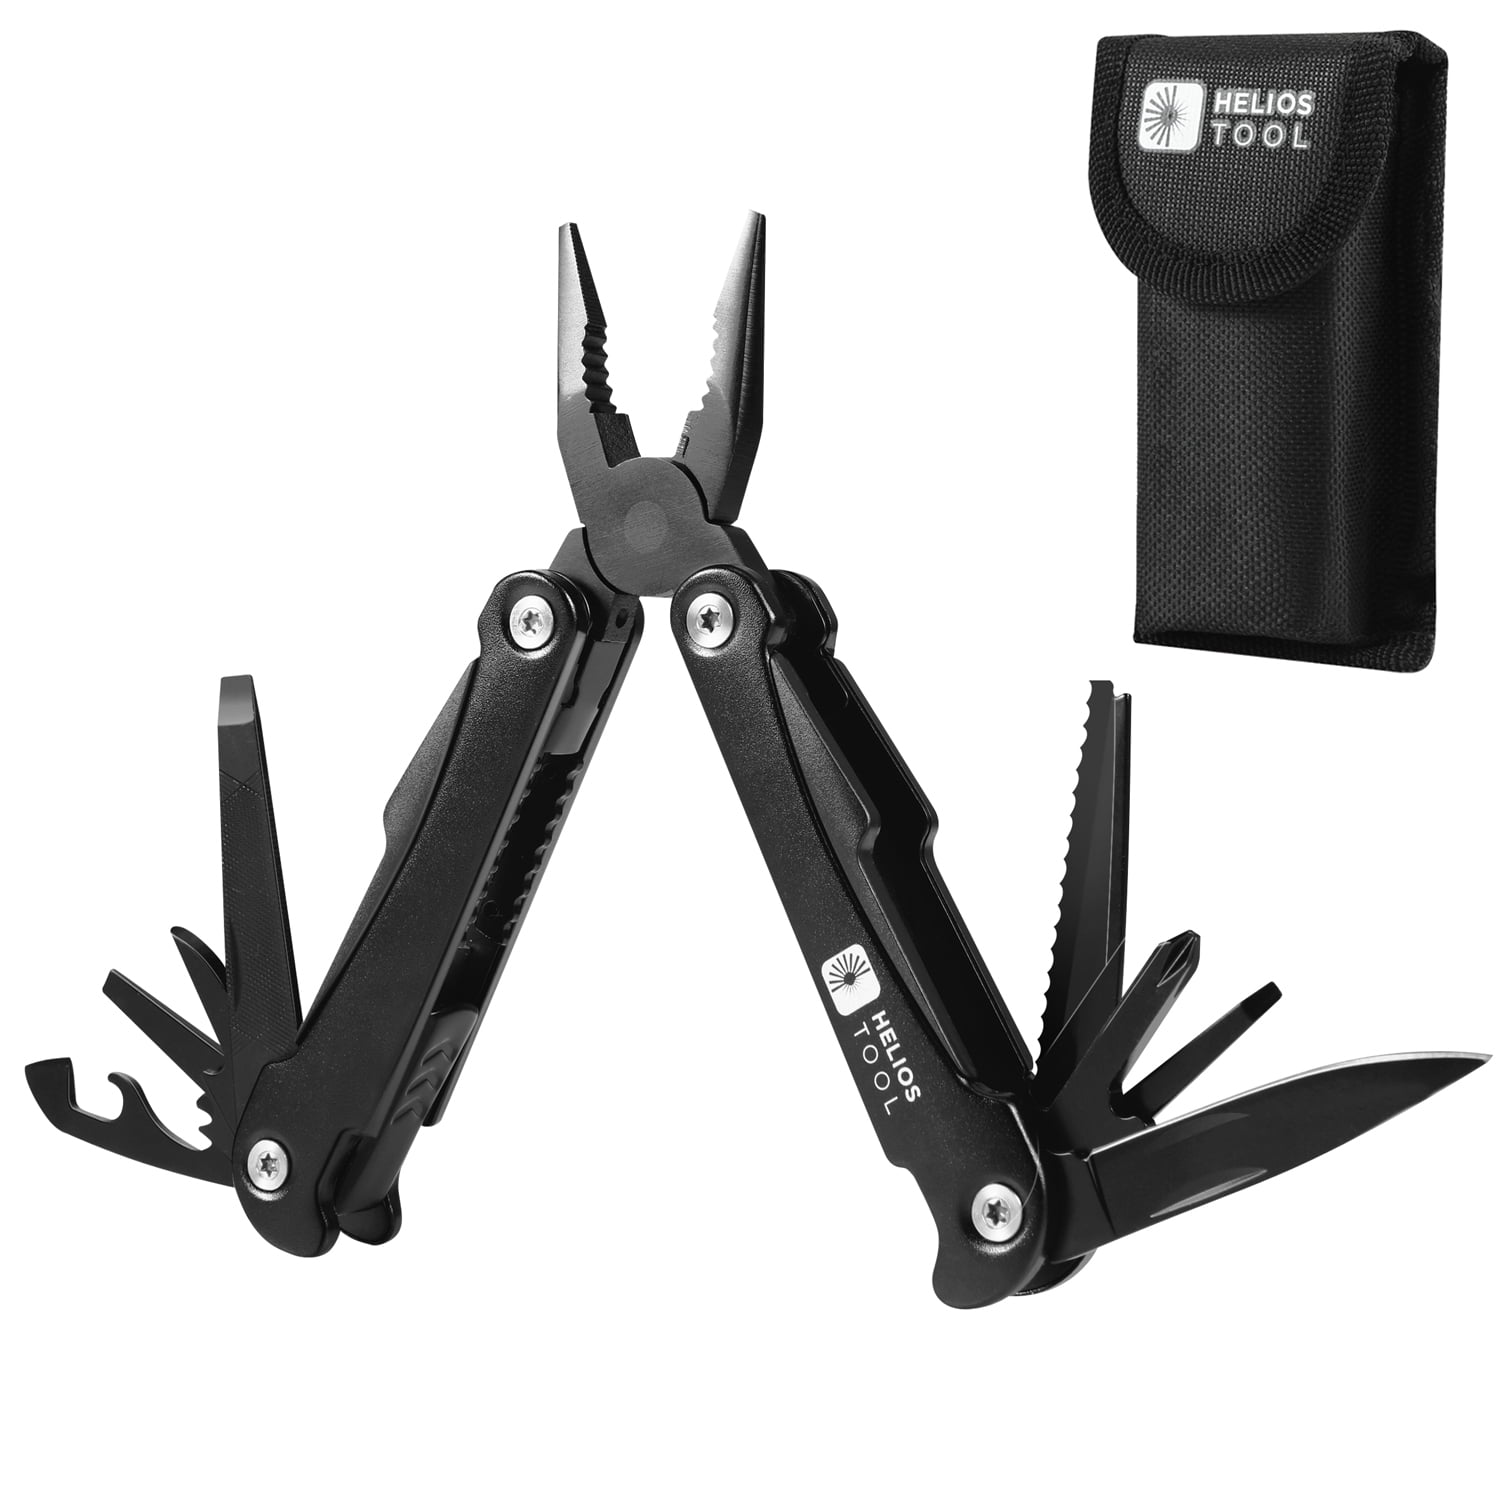 Helios Tool BBQ Multi Tool Set Stainless Steel Folding Multi Use for Grilling 